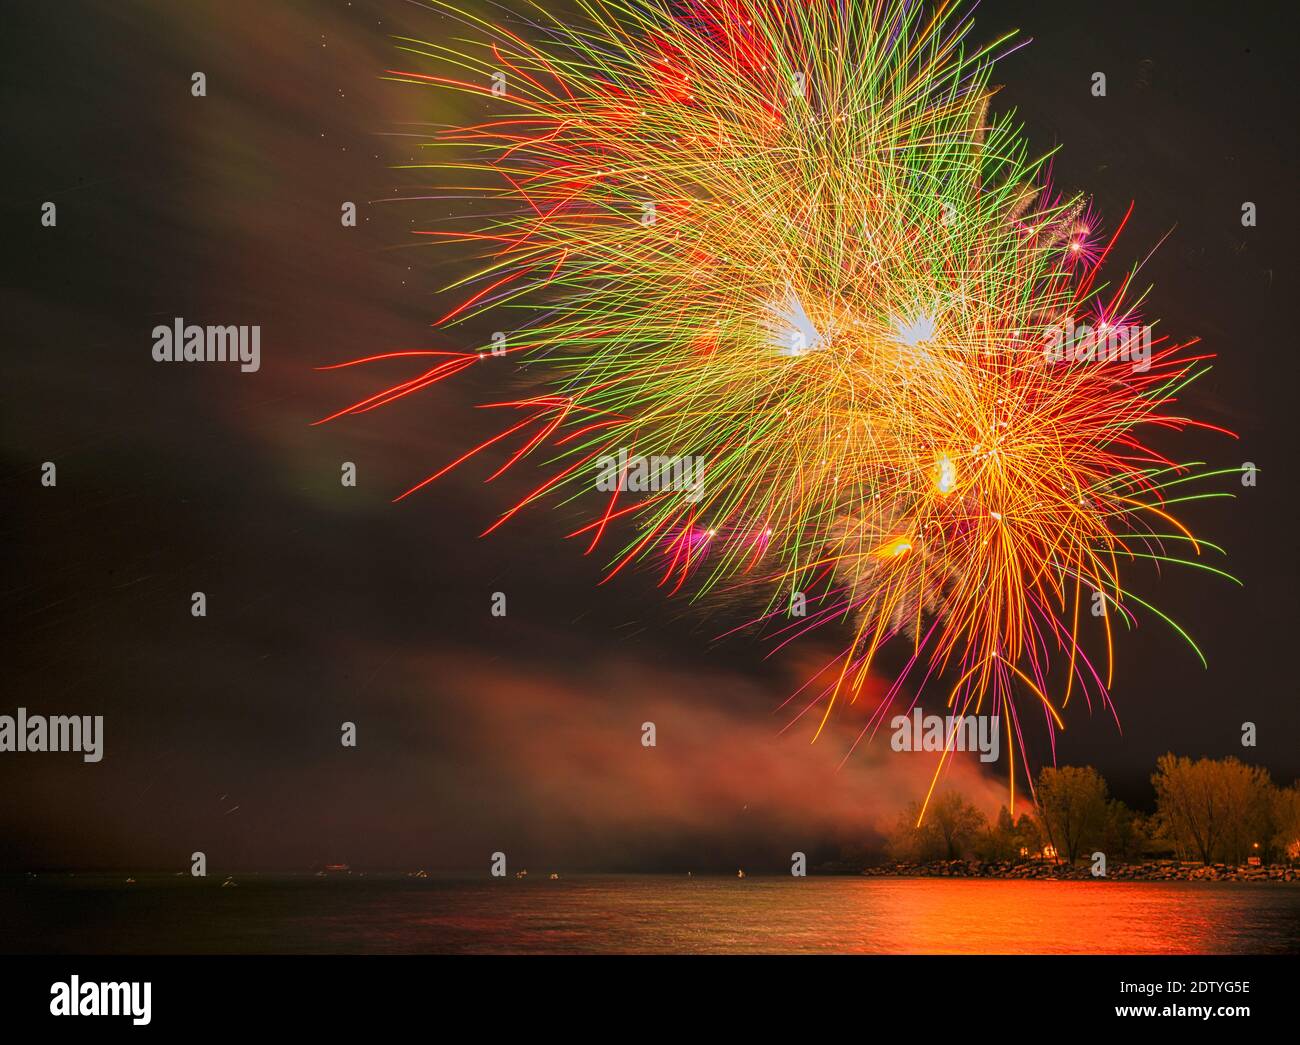 Fireworks at night over a surface of water Stock Photo